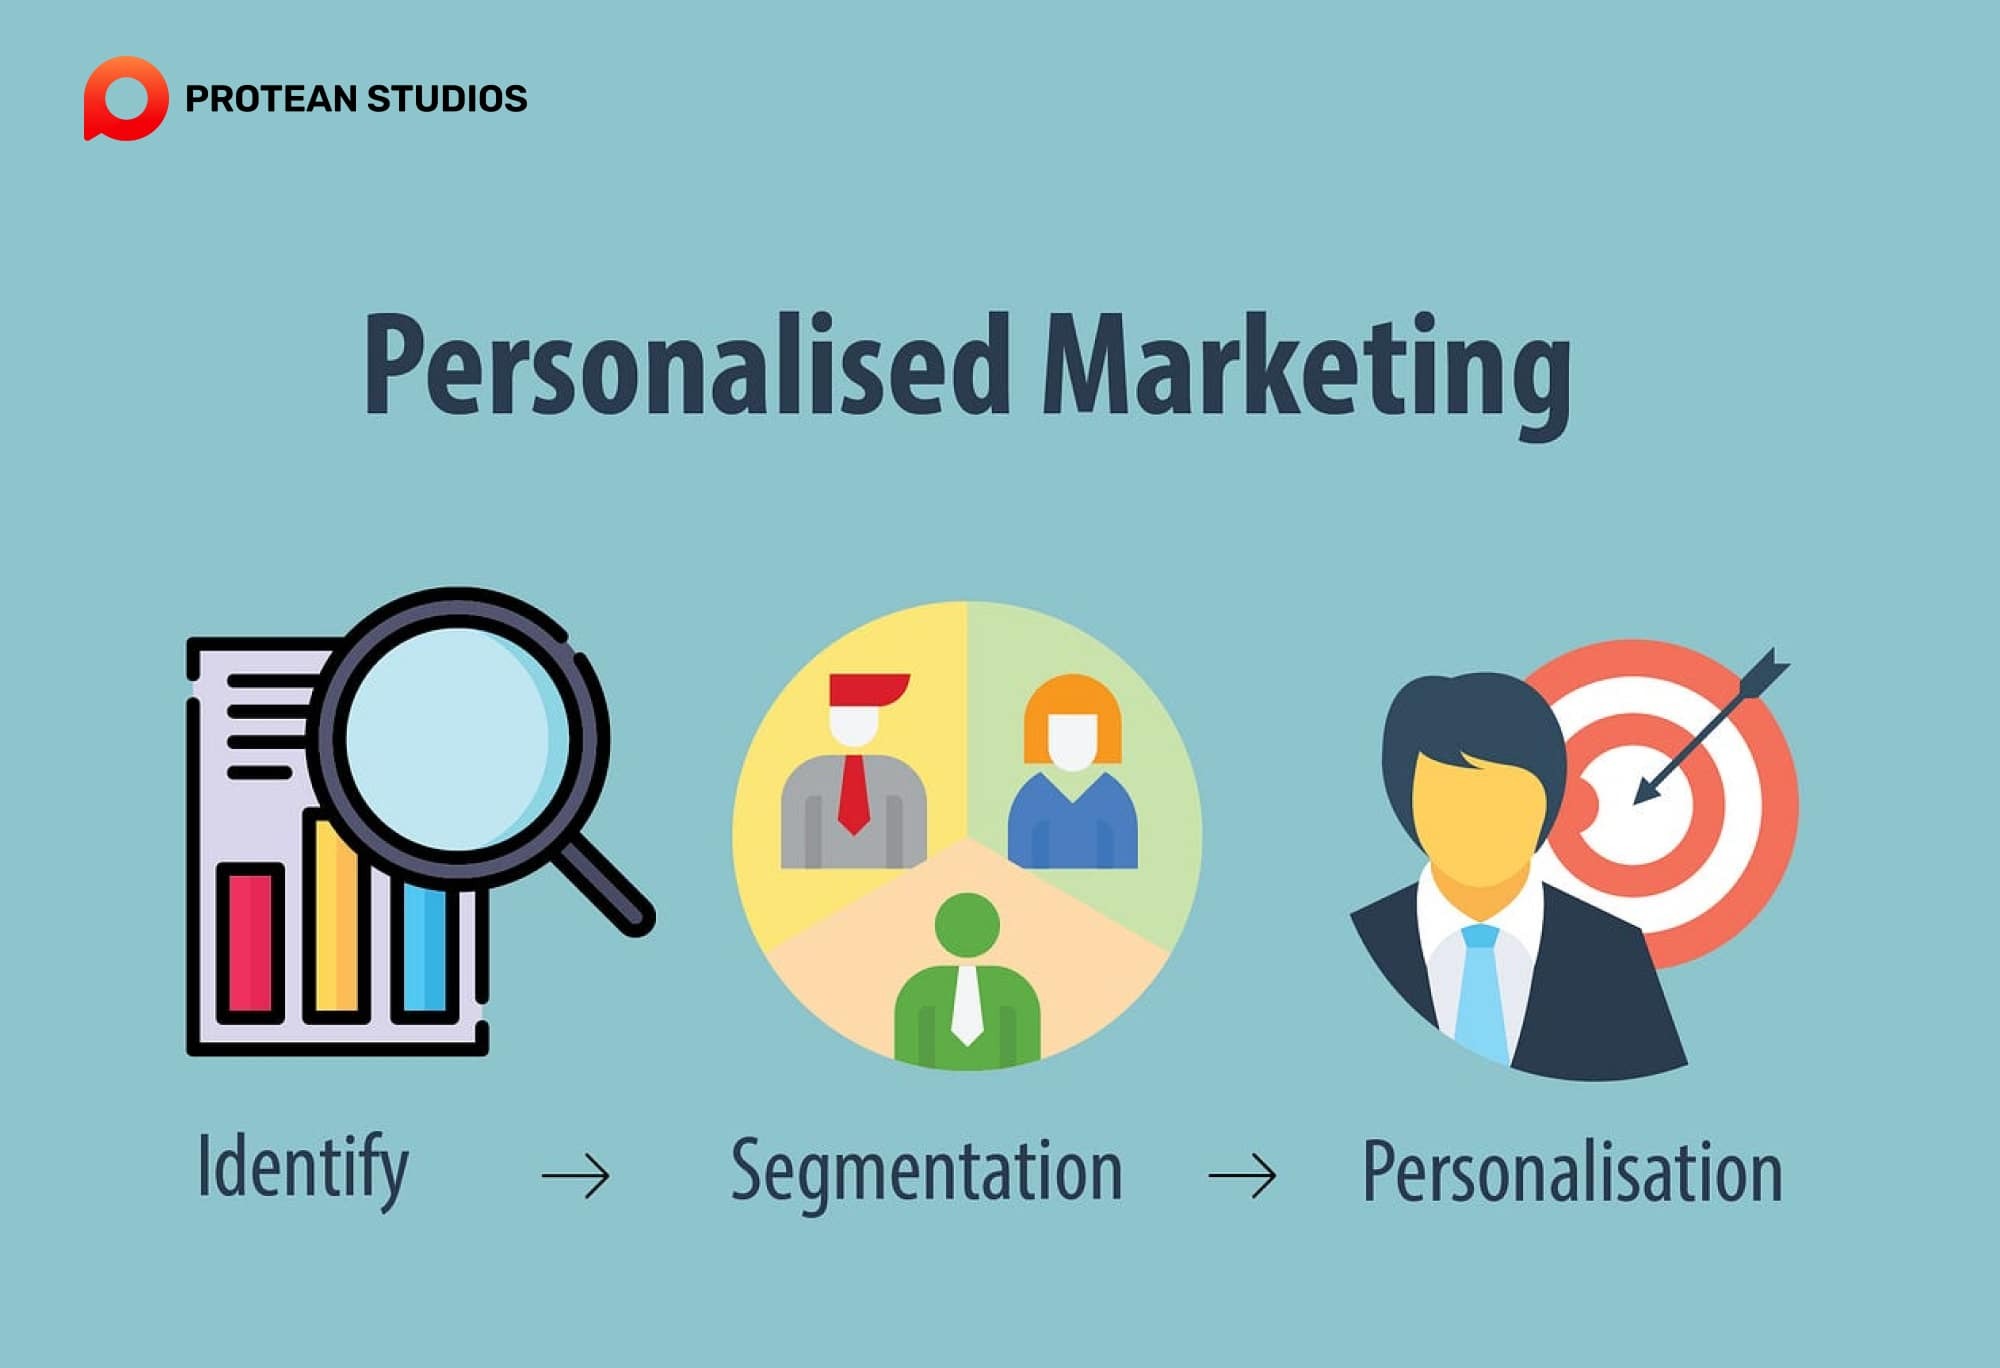 Personalized marketing and its roles